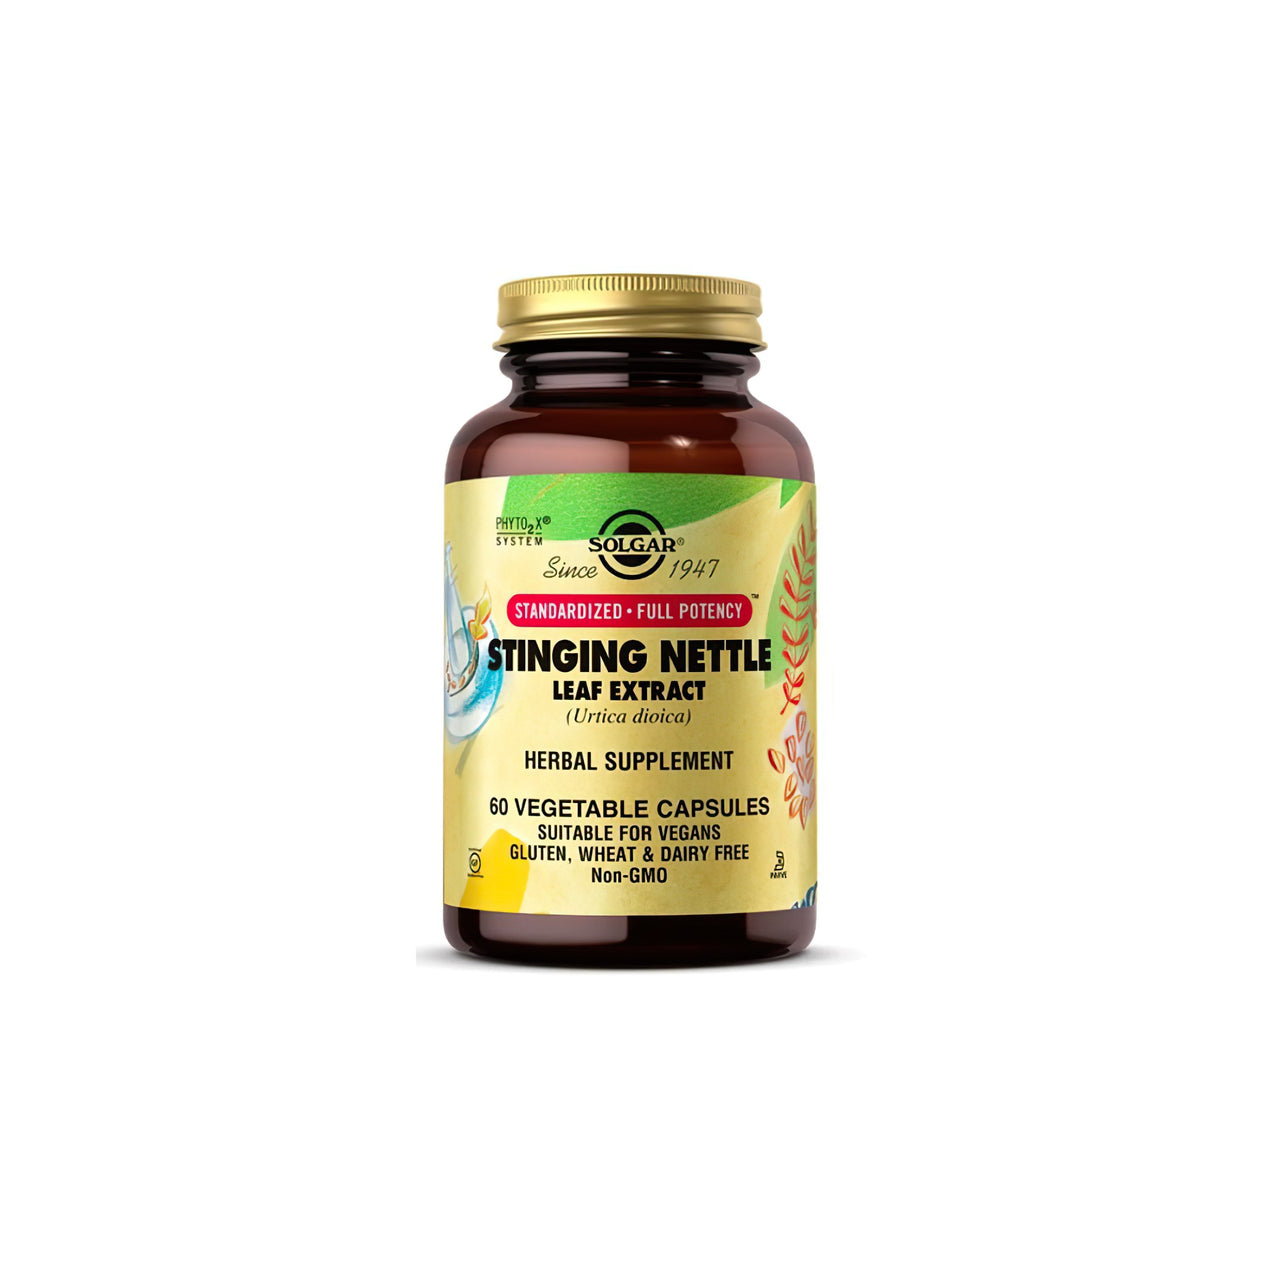 A bottle of Stinging Nettle Leaf Extract 60 vegetable capsules by Solgar that promotes metabolism and aids in weight loss.